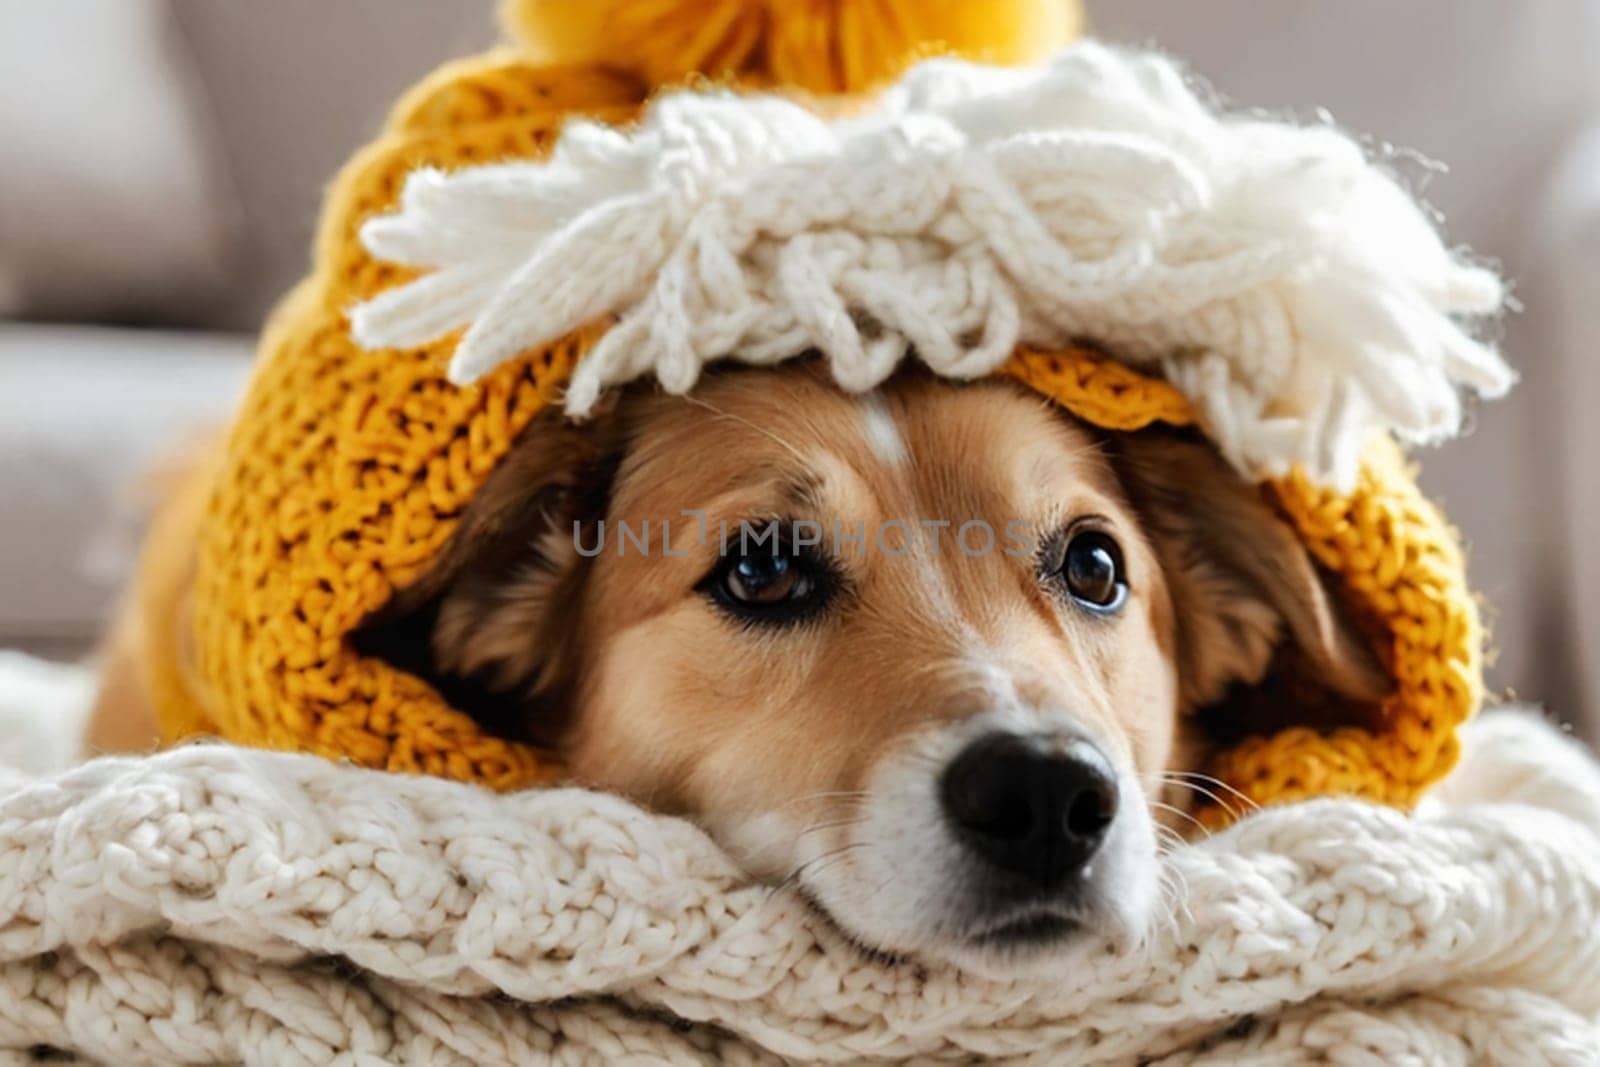 Funny dog sticks out its muzzle among woolen knitted clothes.